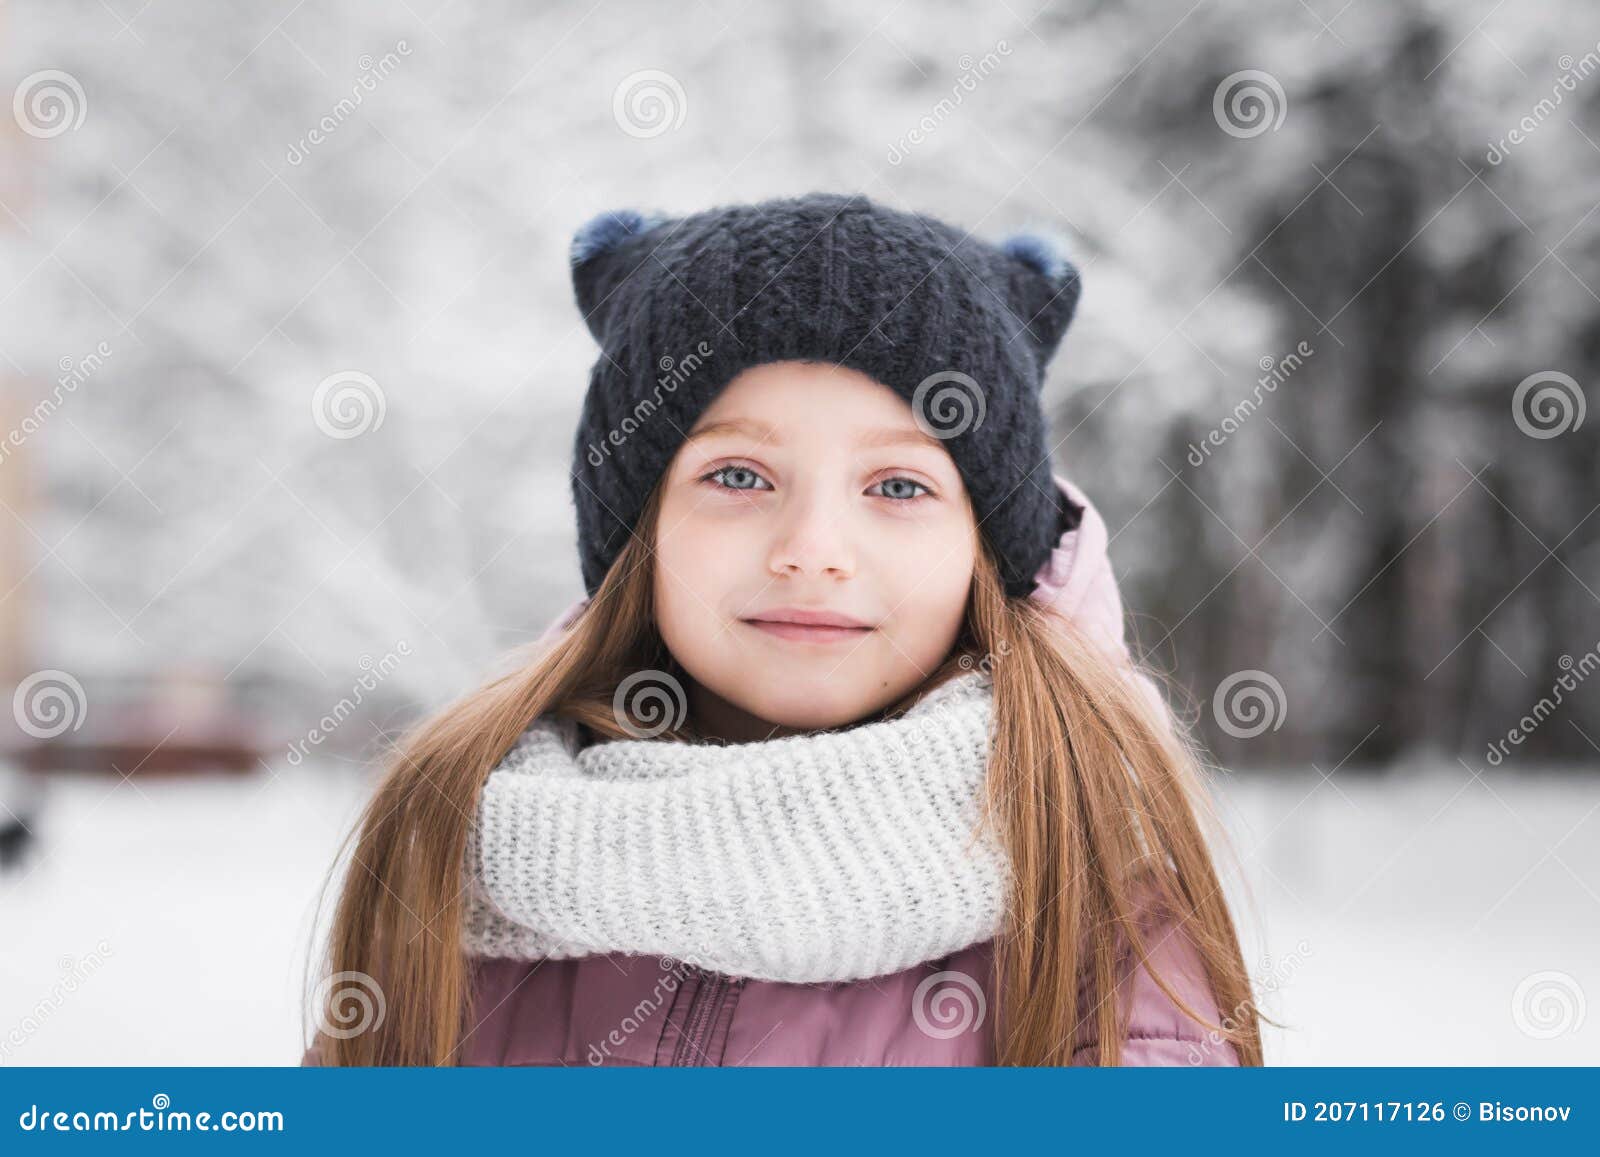 Beautiful Little Girl Five Years Old Portrait in a Snowy City Park ...